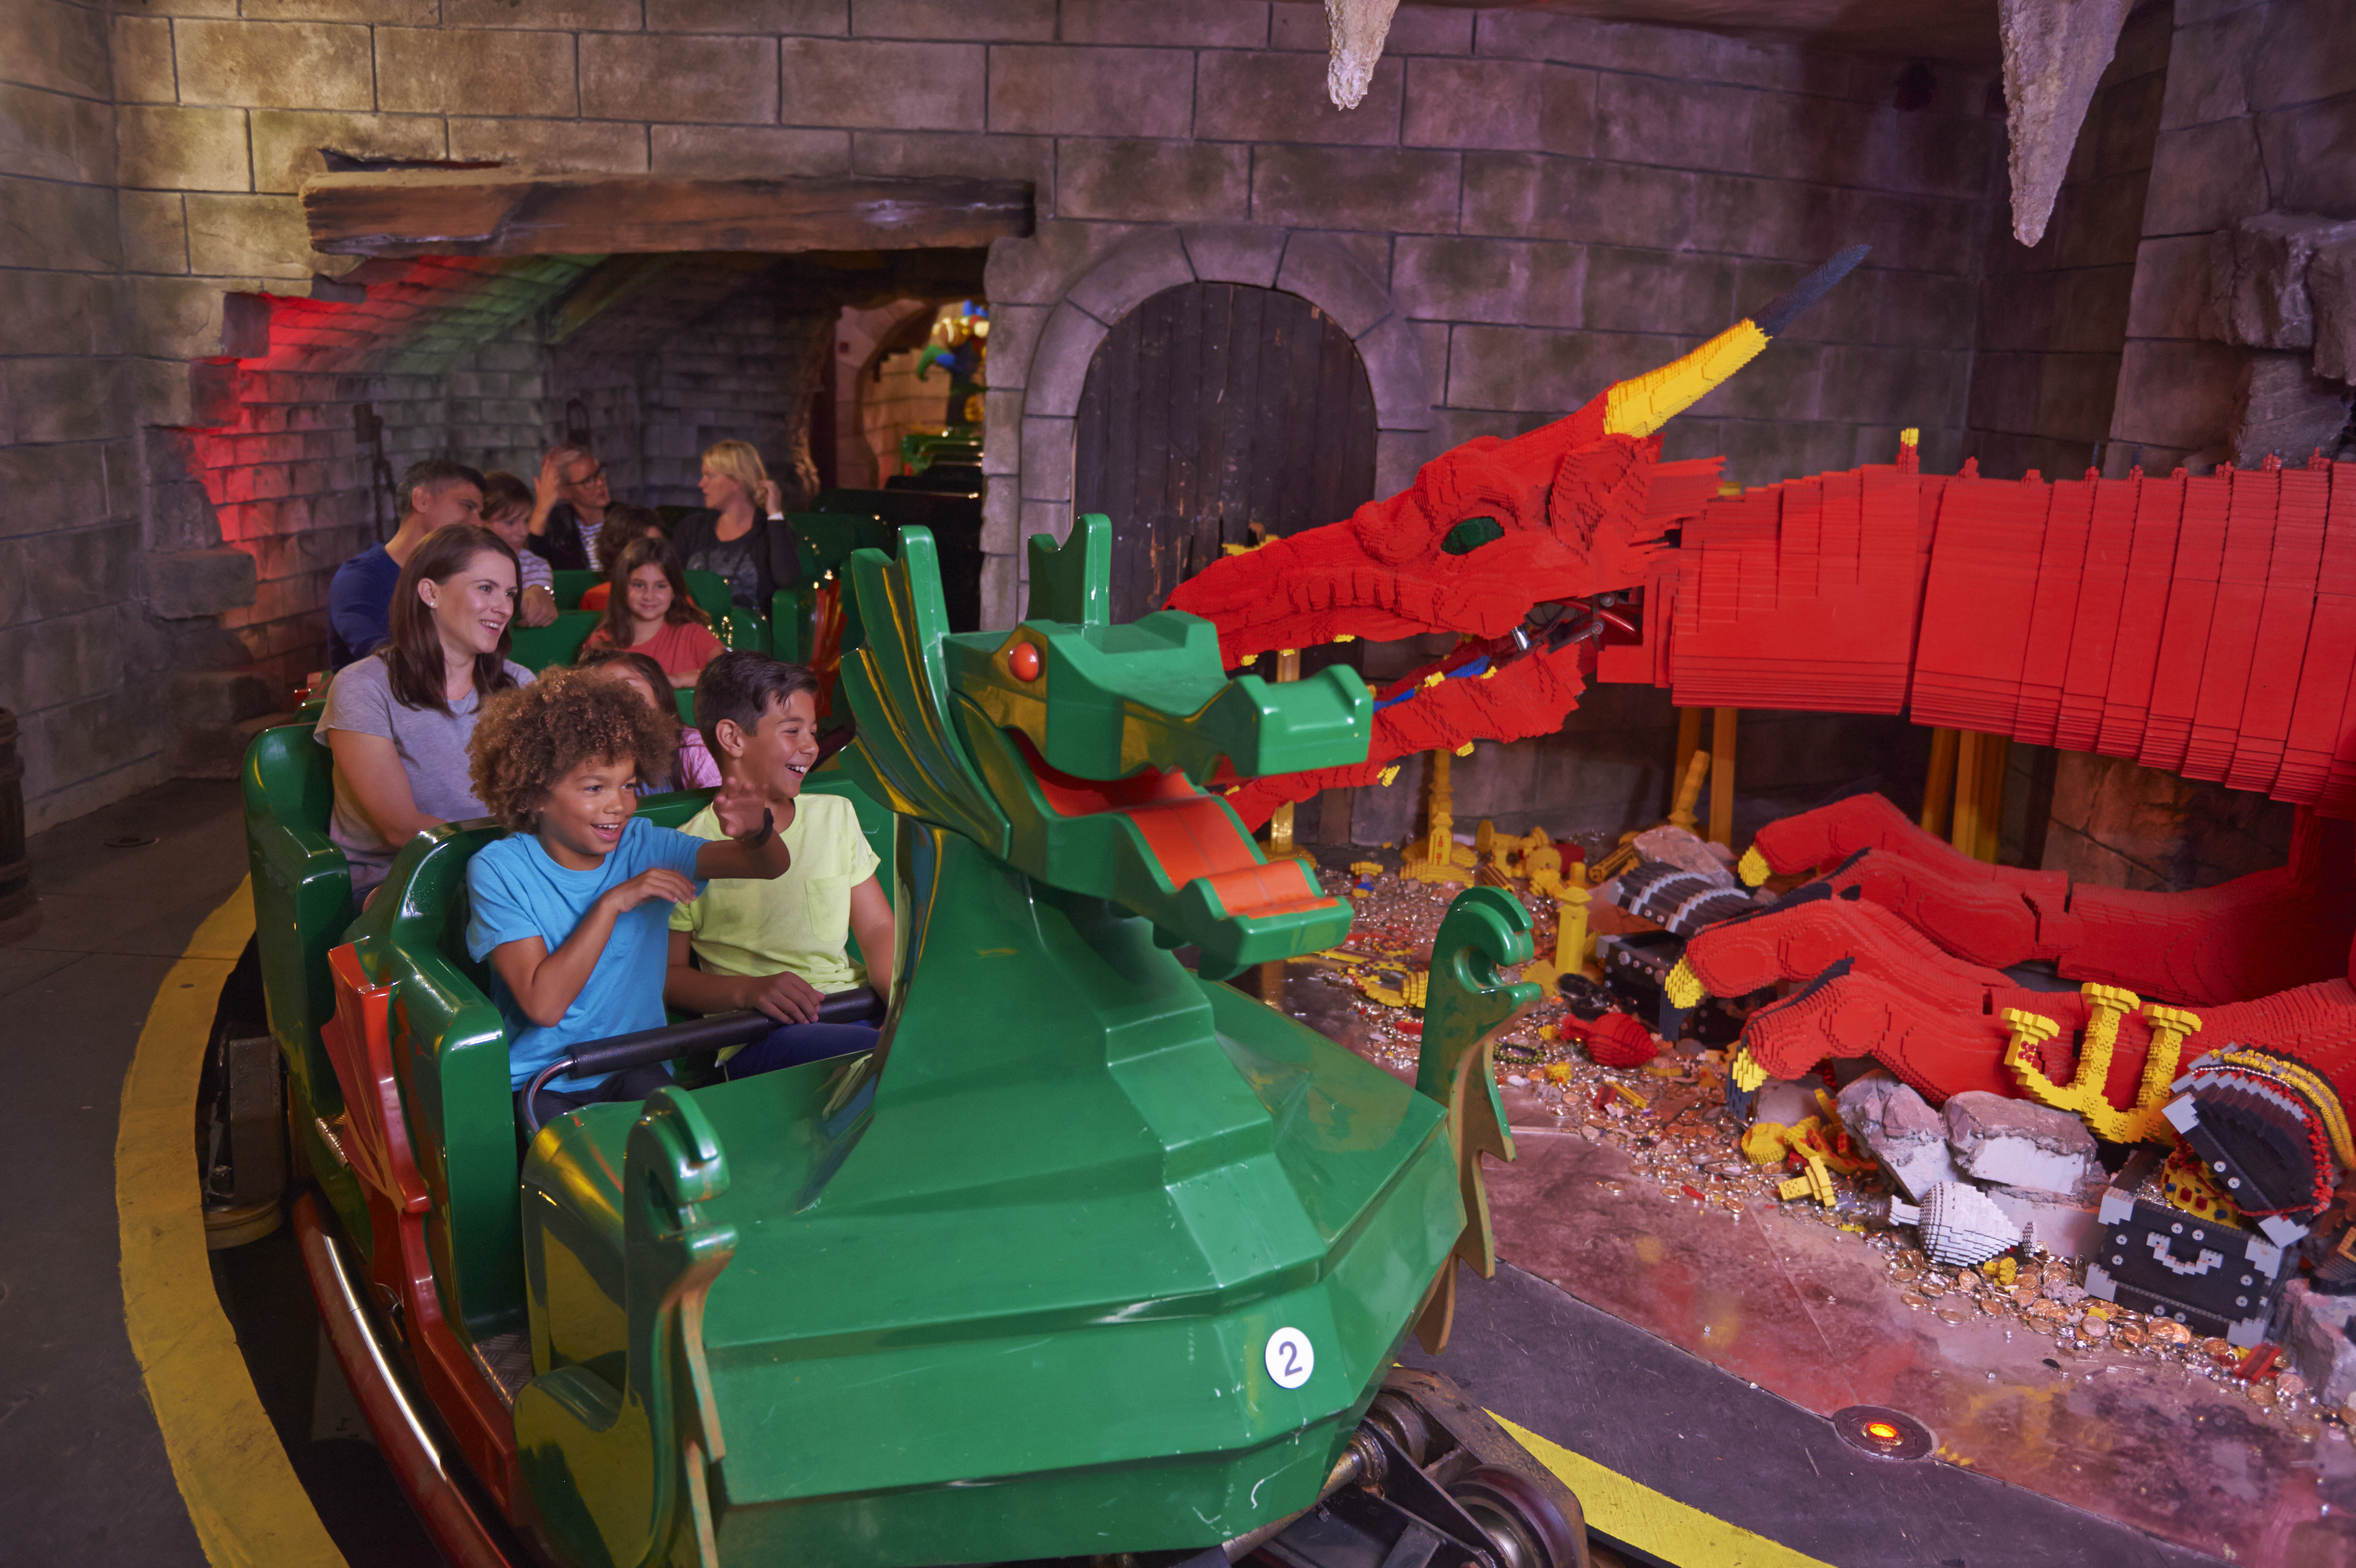 Families On The Dragon At The LEGOLAND Windsor Resort